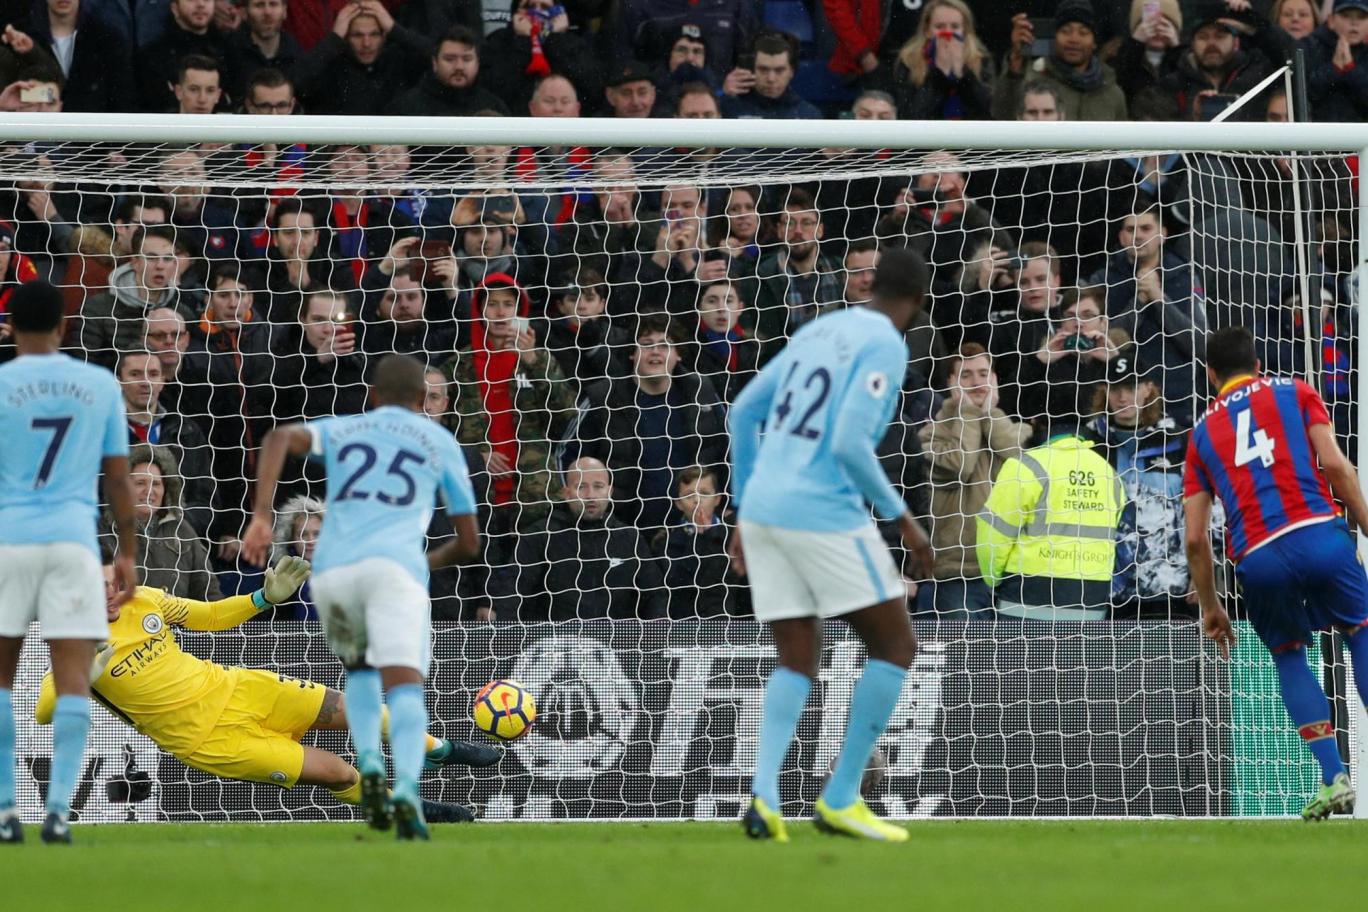 Crystal Palace Ends Manchester City's Winning Streak With A Crunching Draw